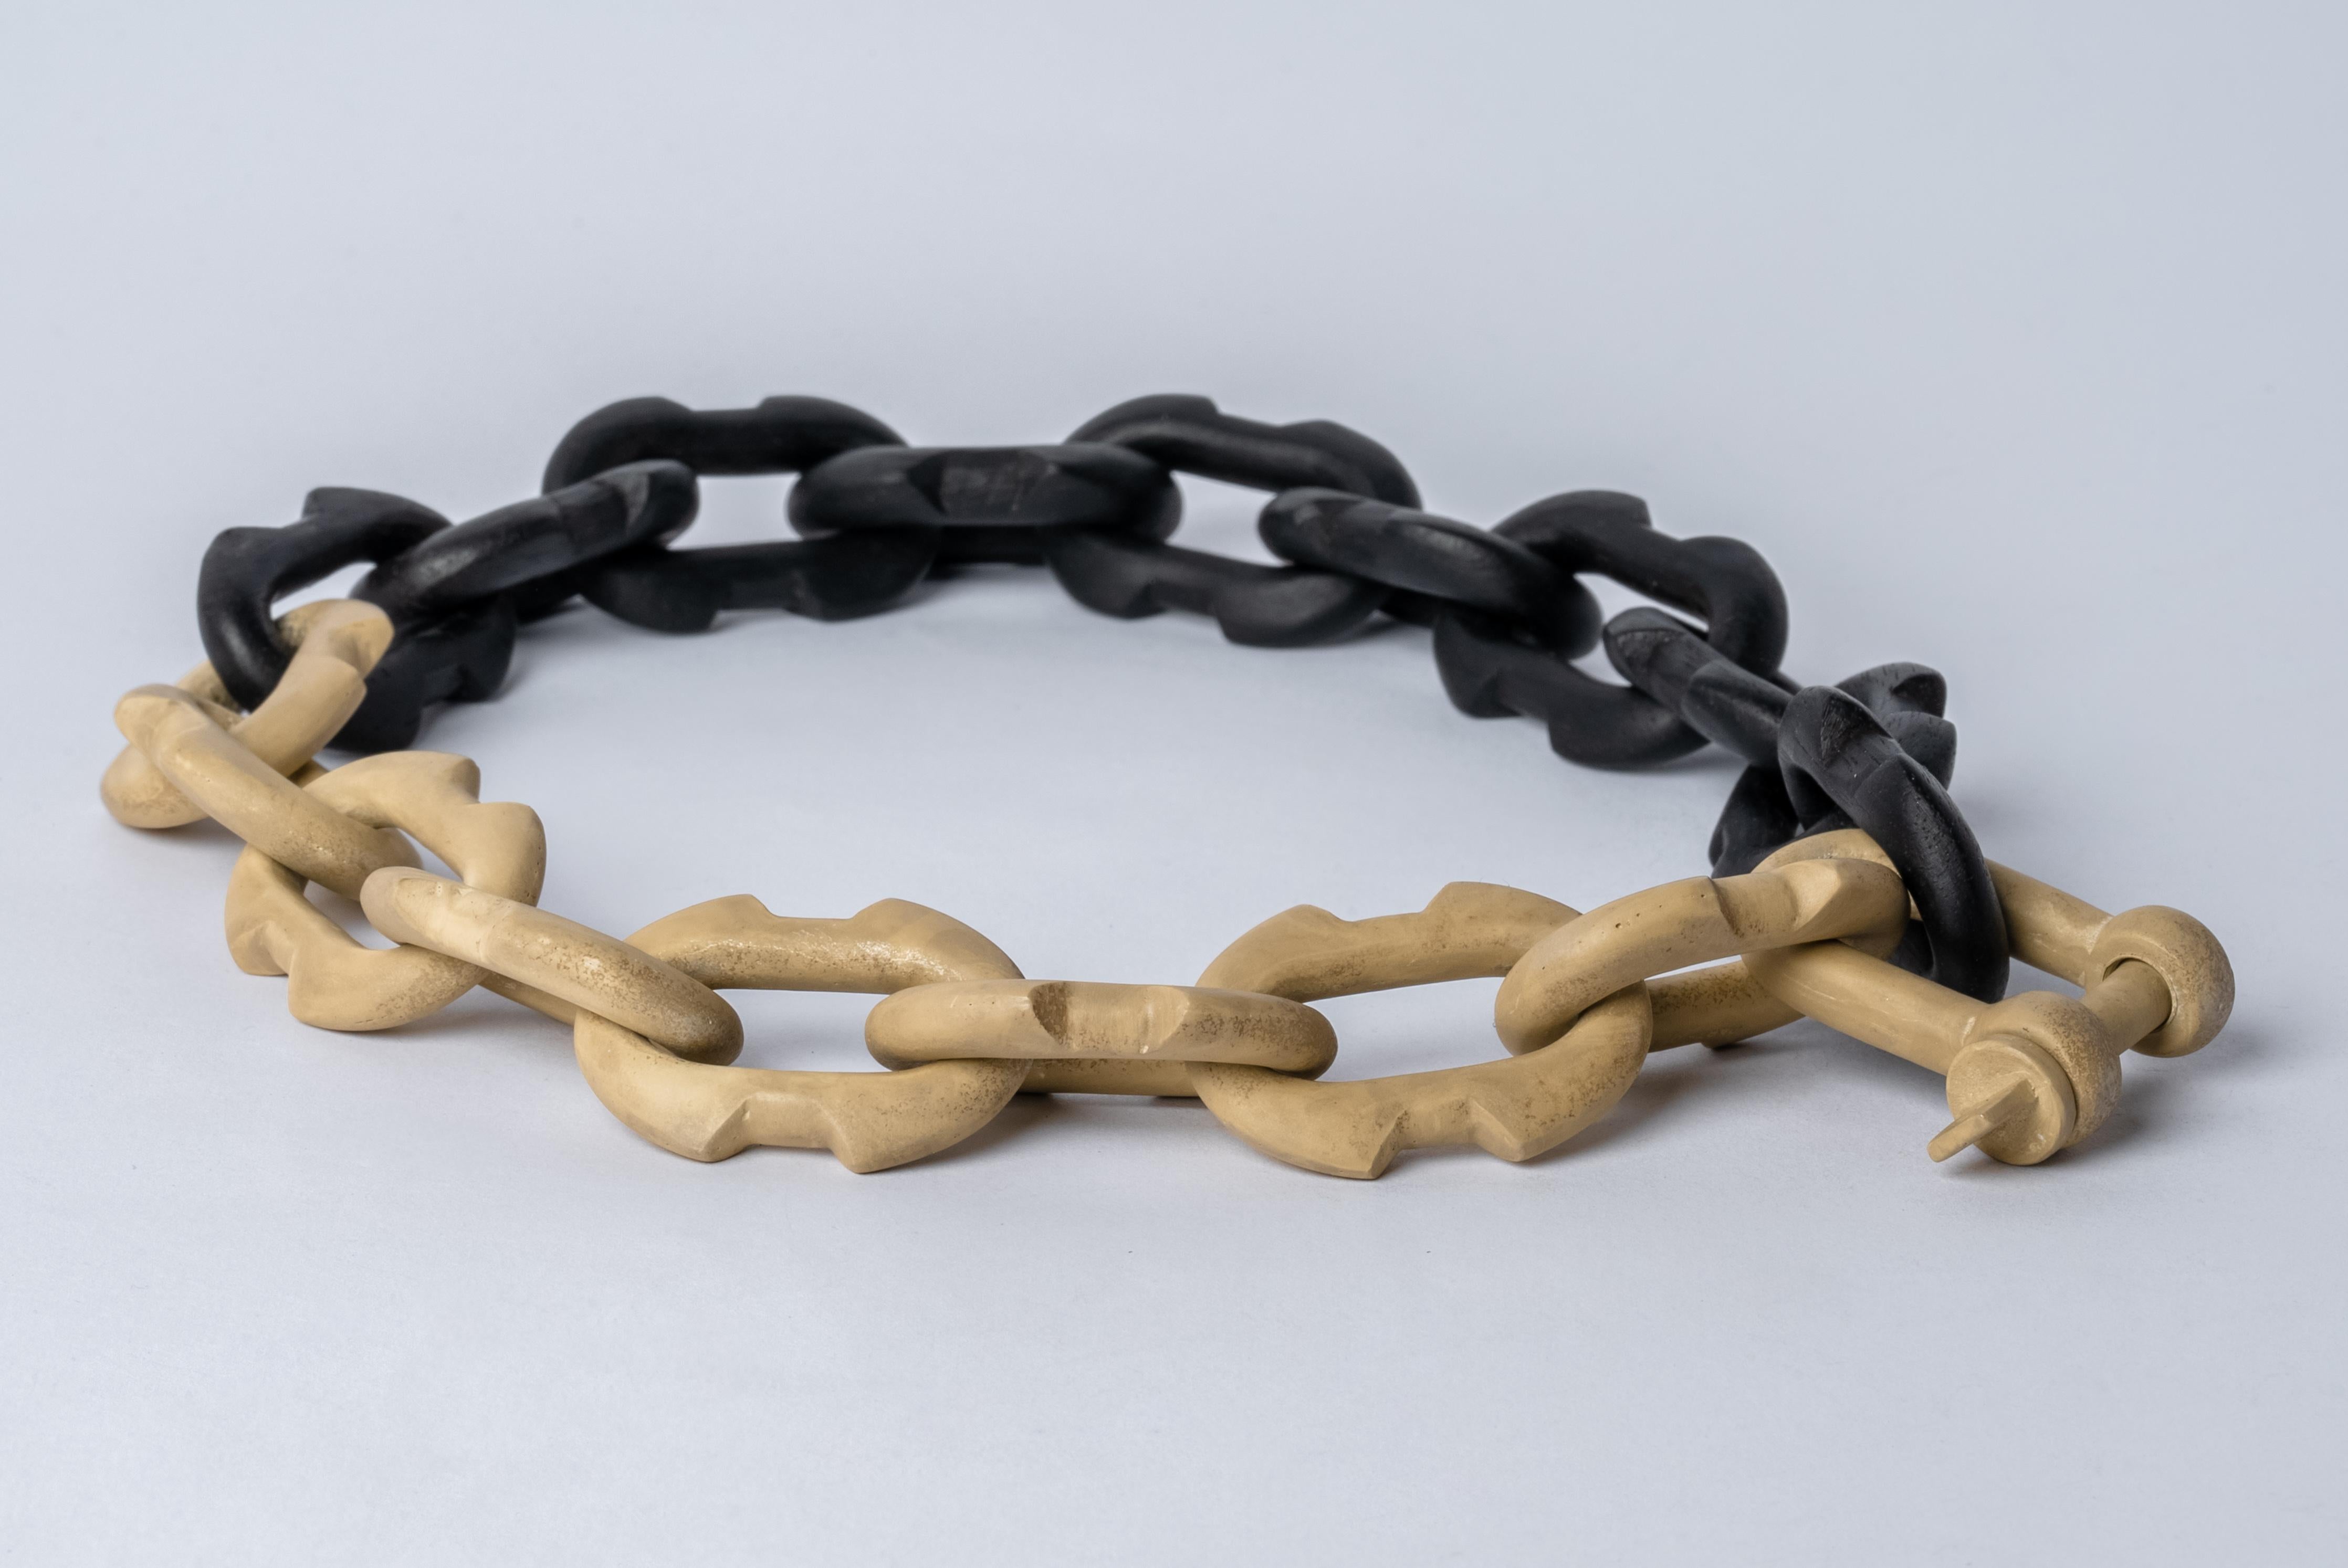 Chain necklace made of brass and wood. All organic chain is carved by hand. In the case of the chains made of wood, they are absolutely seamless; carved from a single long slab of wood (see link). Brass is silver plated and heavy acid treated.
The